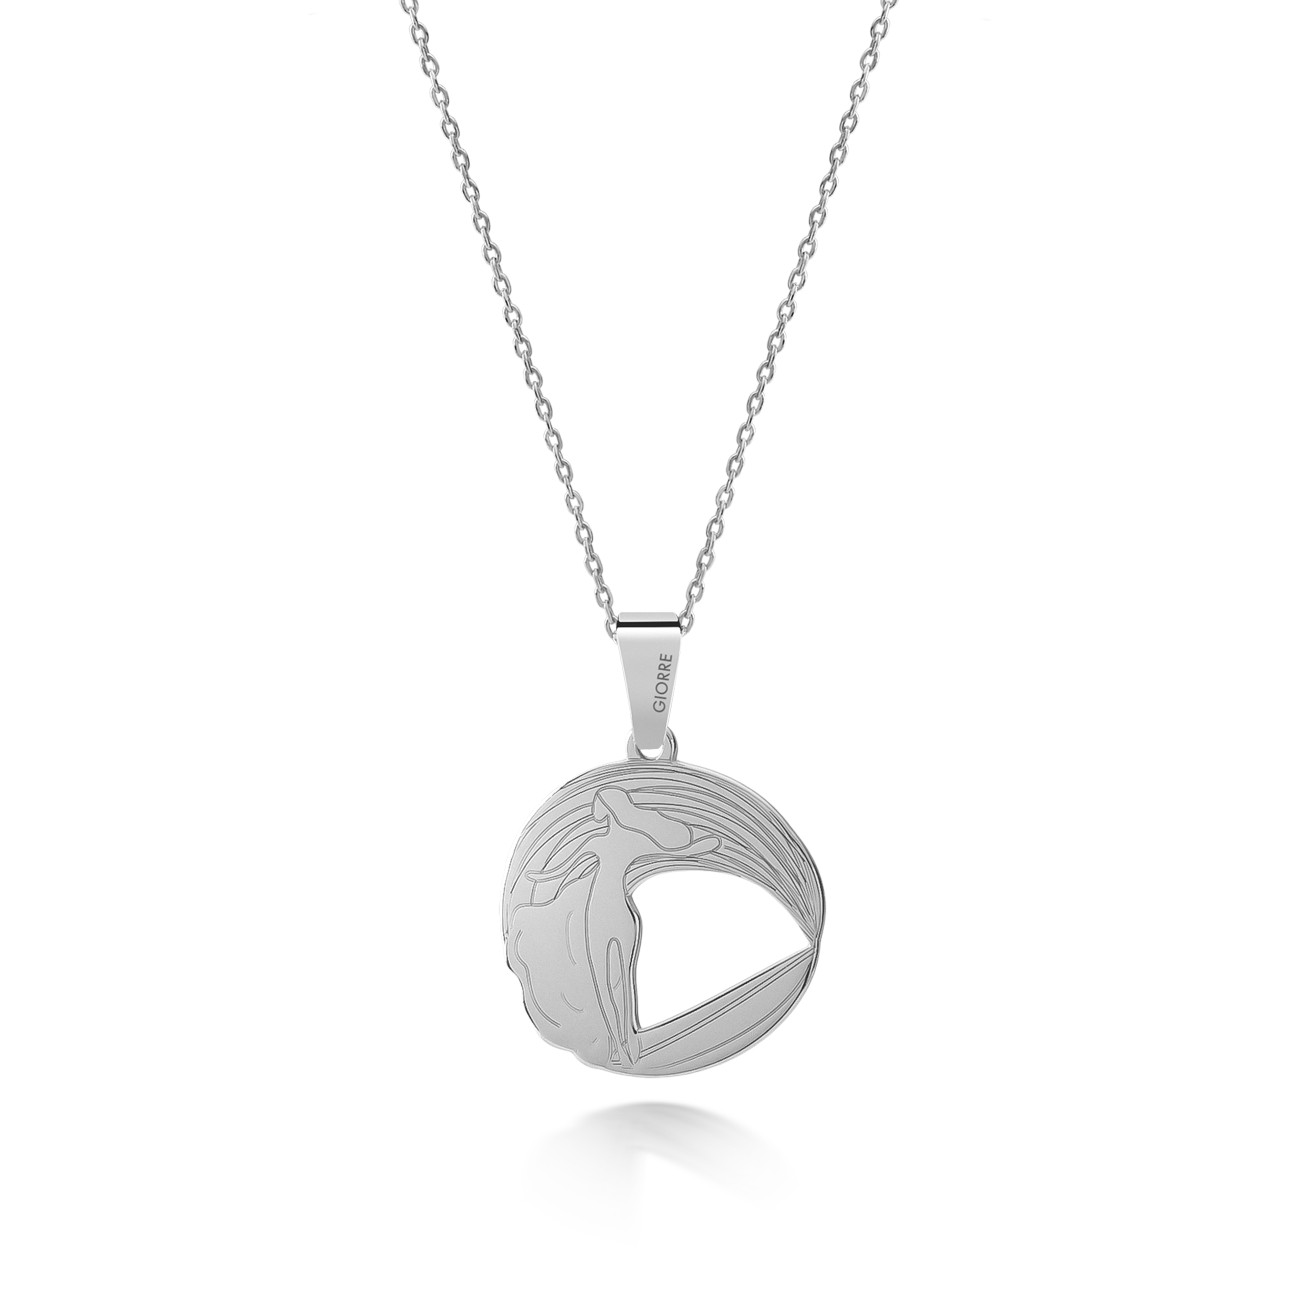 Silver surfer necklace, AUGUSTYNKA x GIORRE